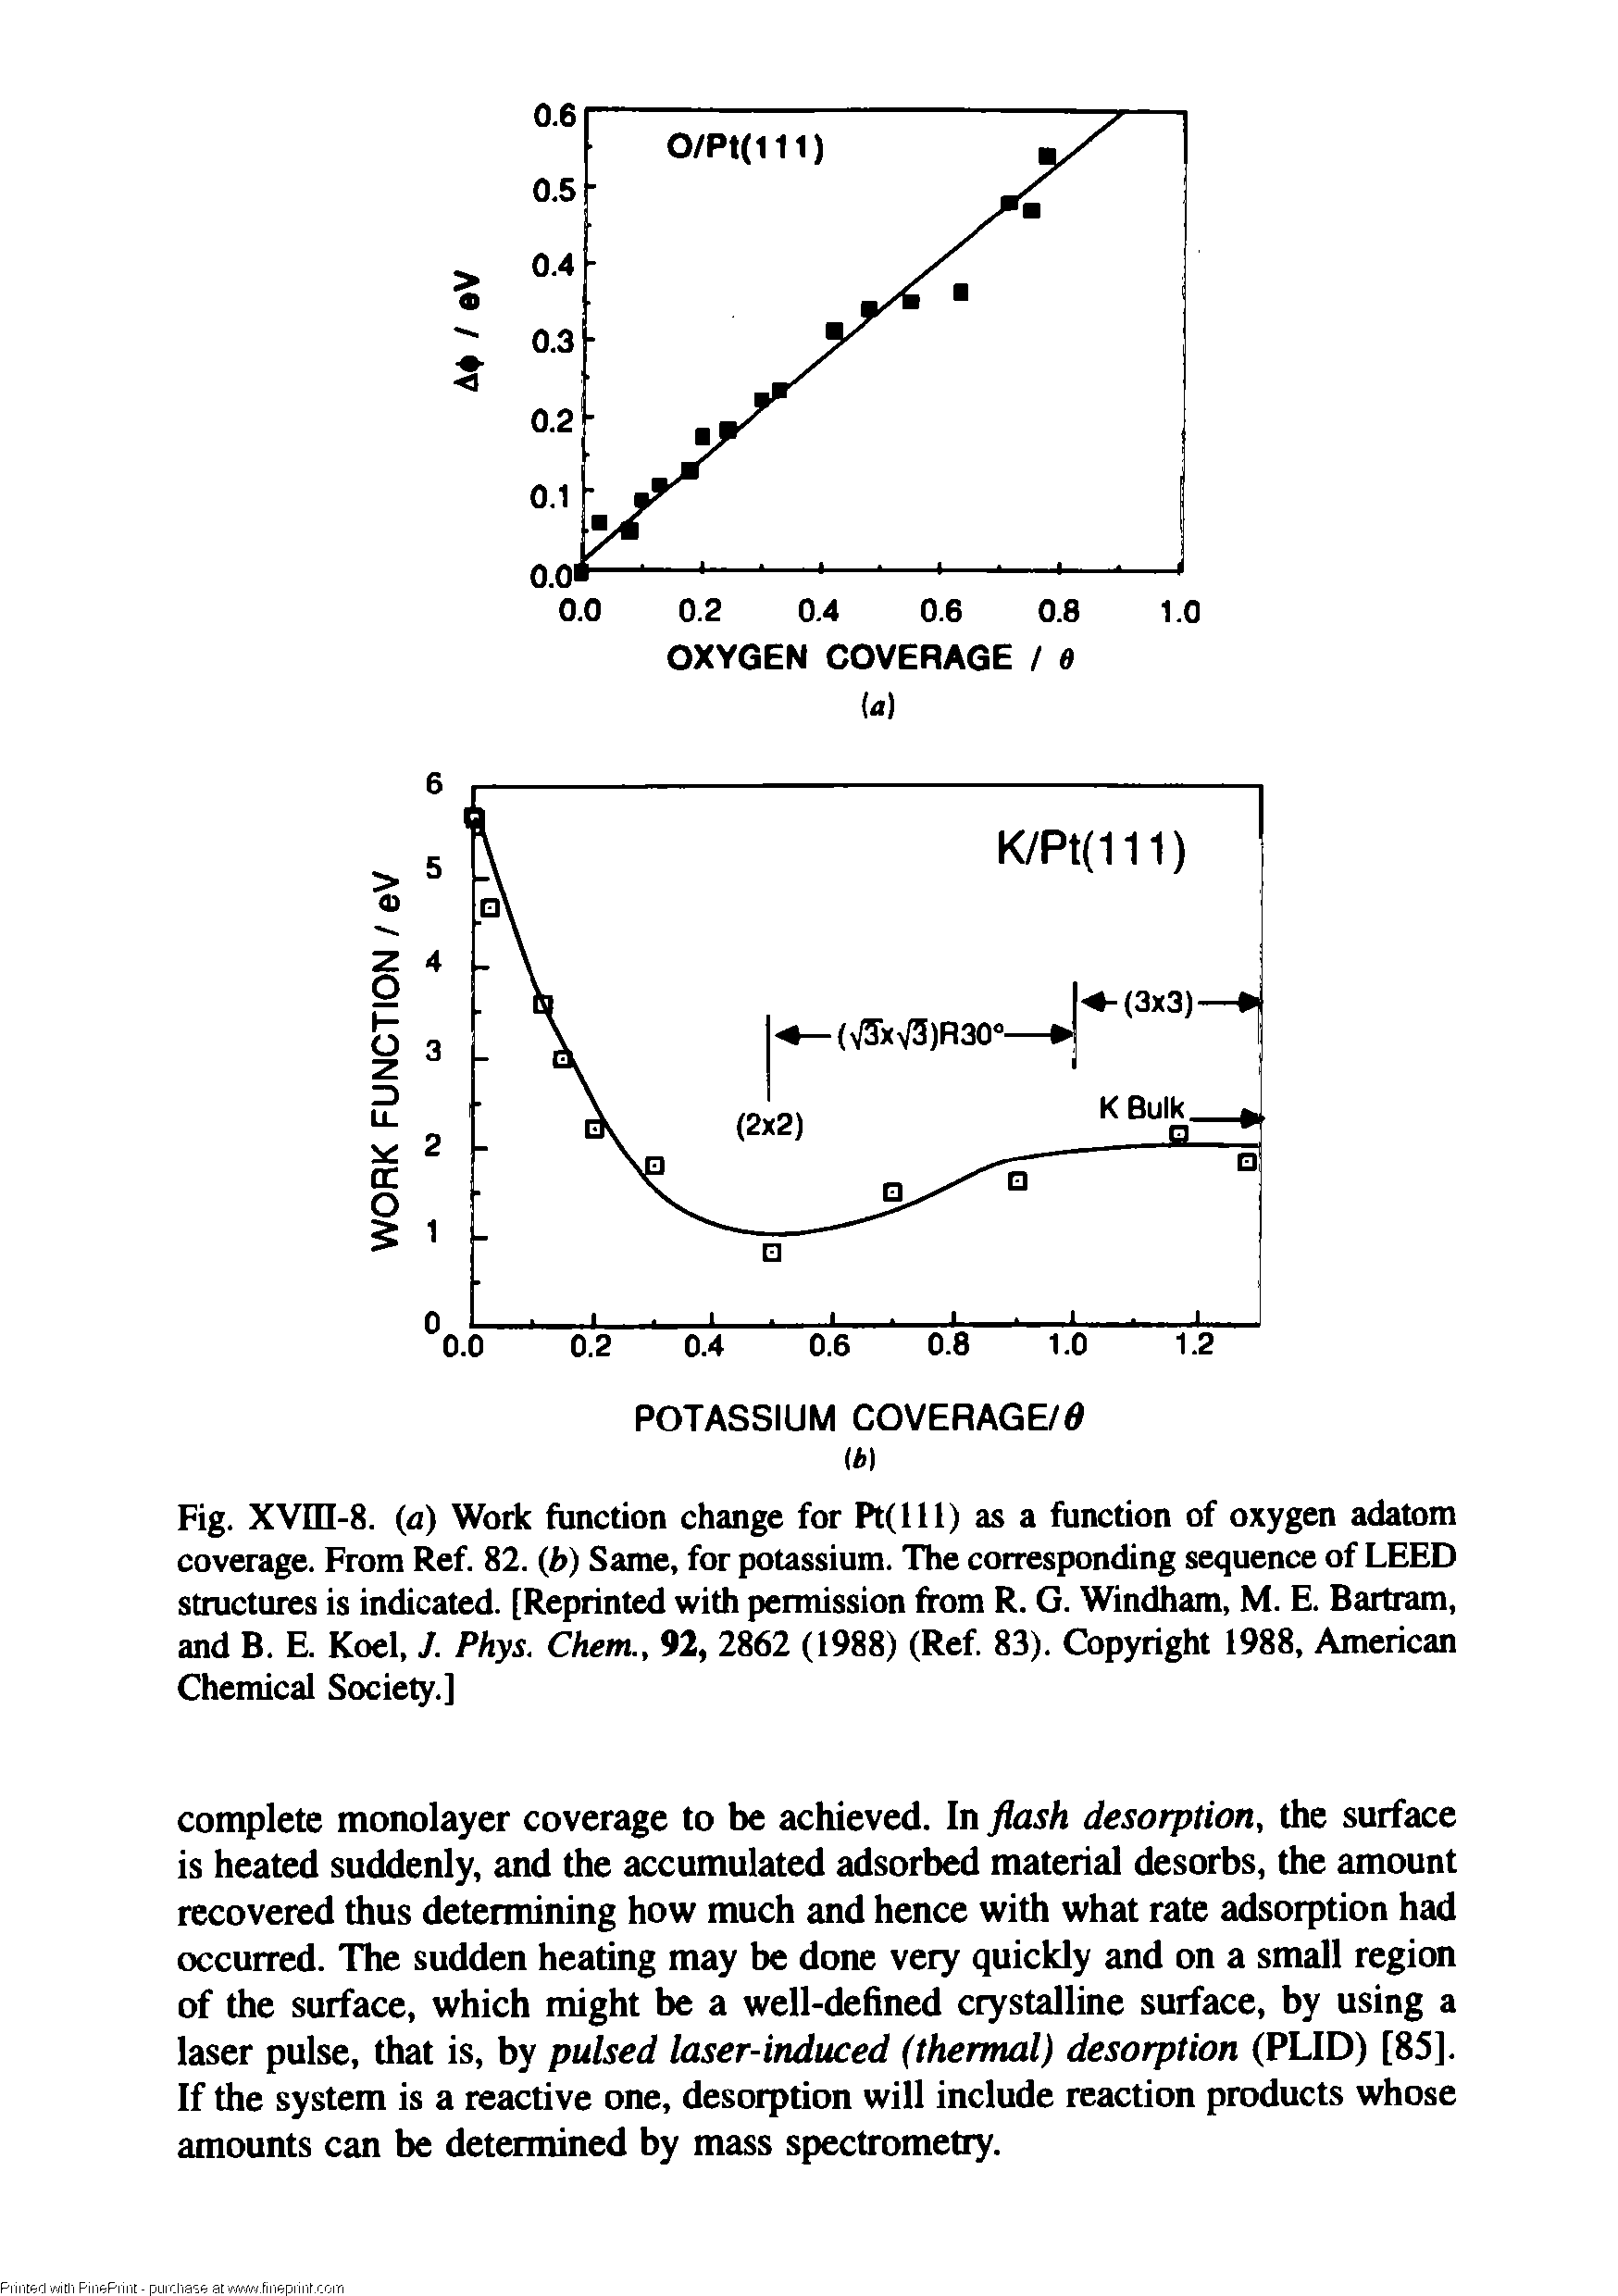 Fig. XVni-8. (a) Work function change for Pt(lU) as a function of oxygen adatom coverage. From Ref. 82. b) Same, for potassium. The corresponding sequence of LEED structures is indicated. [Reprinted with permission from R. G. Windham, M. E. Bartram, and B. E. Koel, J. Phys. Chem., 92, 2862 (1988) (Ref. 83). Copyright 1988, American Chemical Society.]...